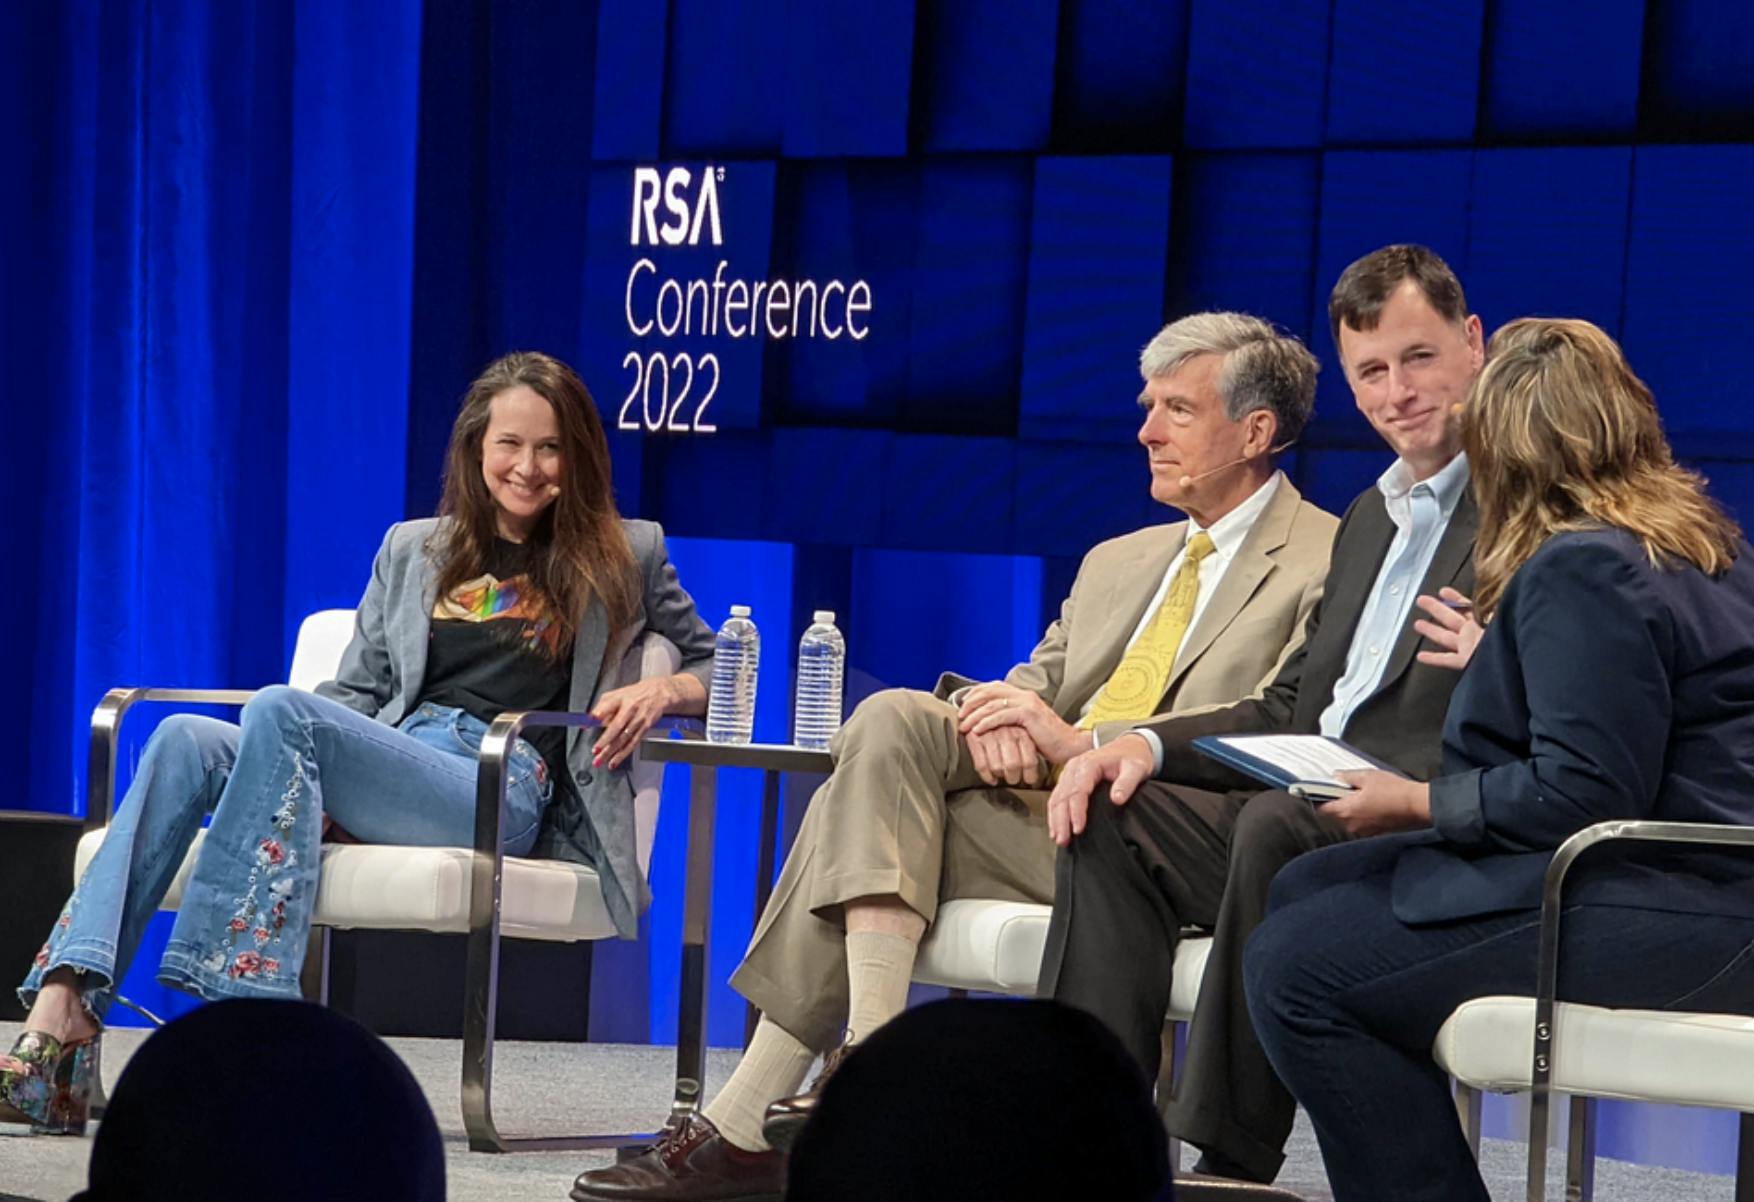 Image of the stage at RSA Conference 2022 with two women and two men sitting on a panel. Related to cyber defense, CISA Shield Up effort, national security defense, cyber security engineer, cyber security jobs, cyber security definition, cyber security framework, and cyber security threats.